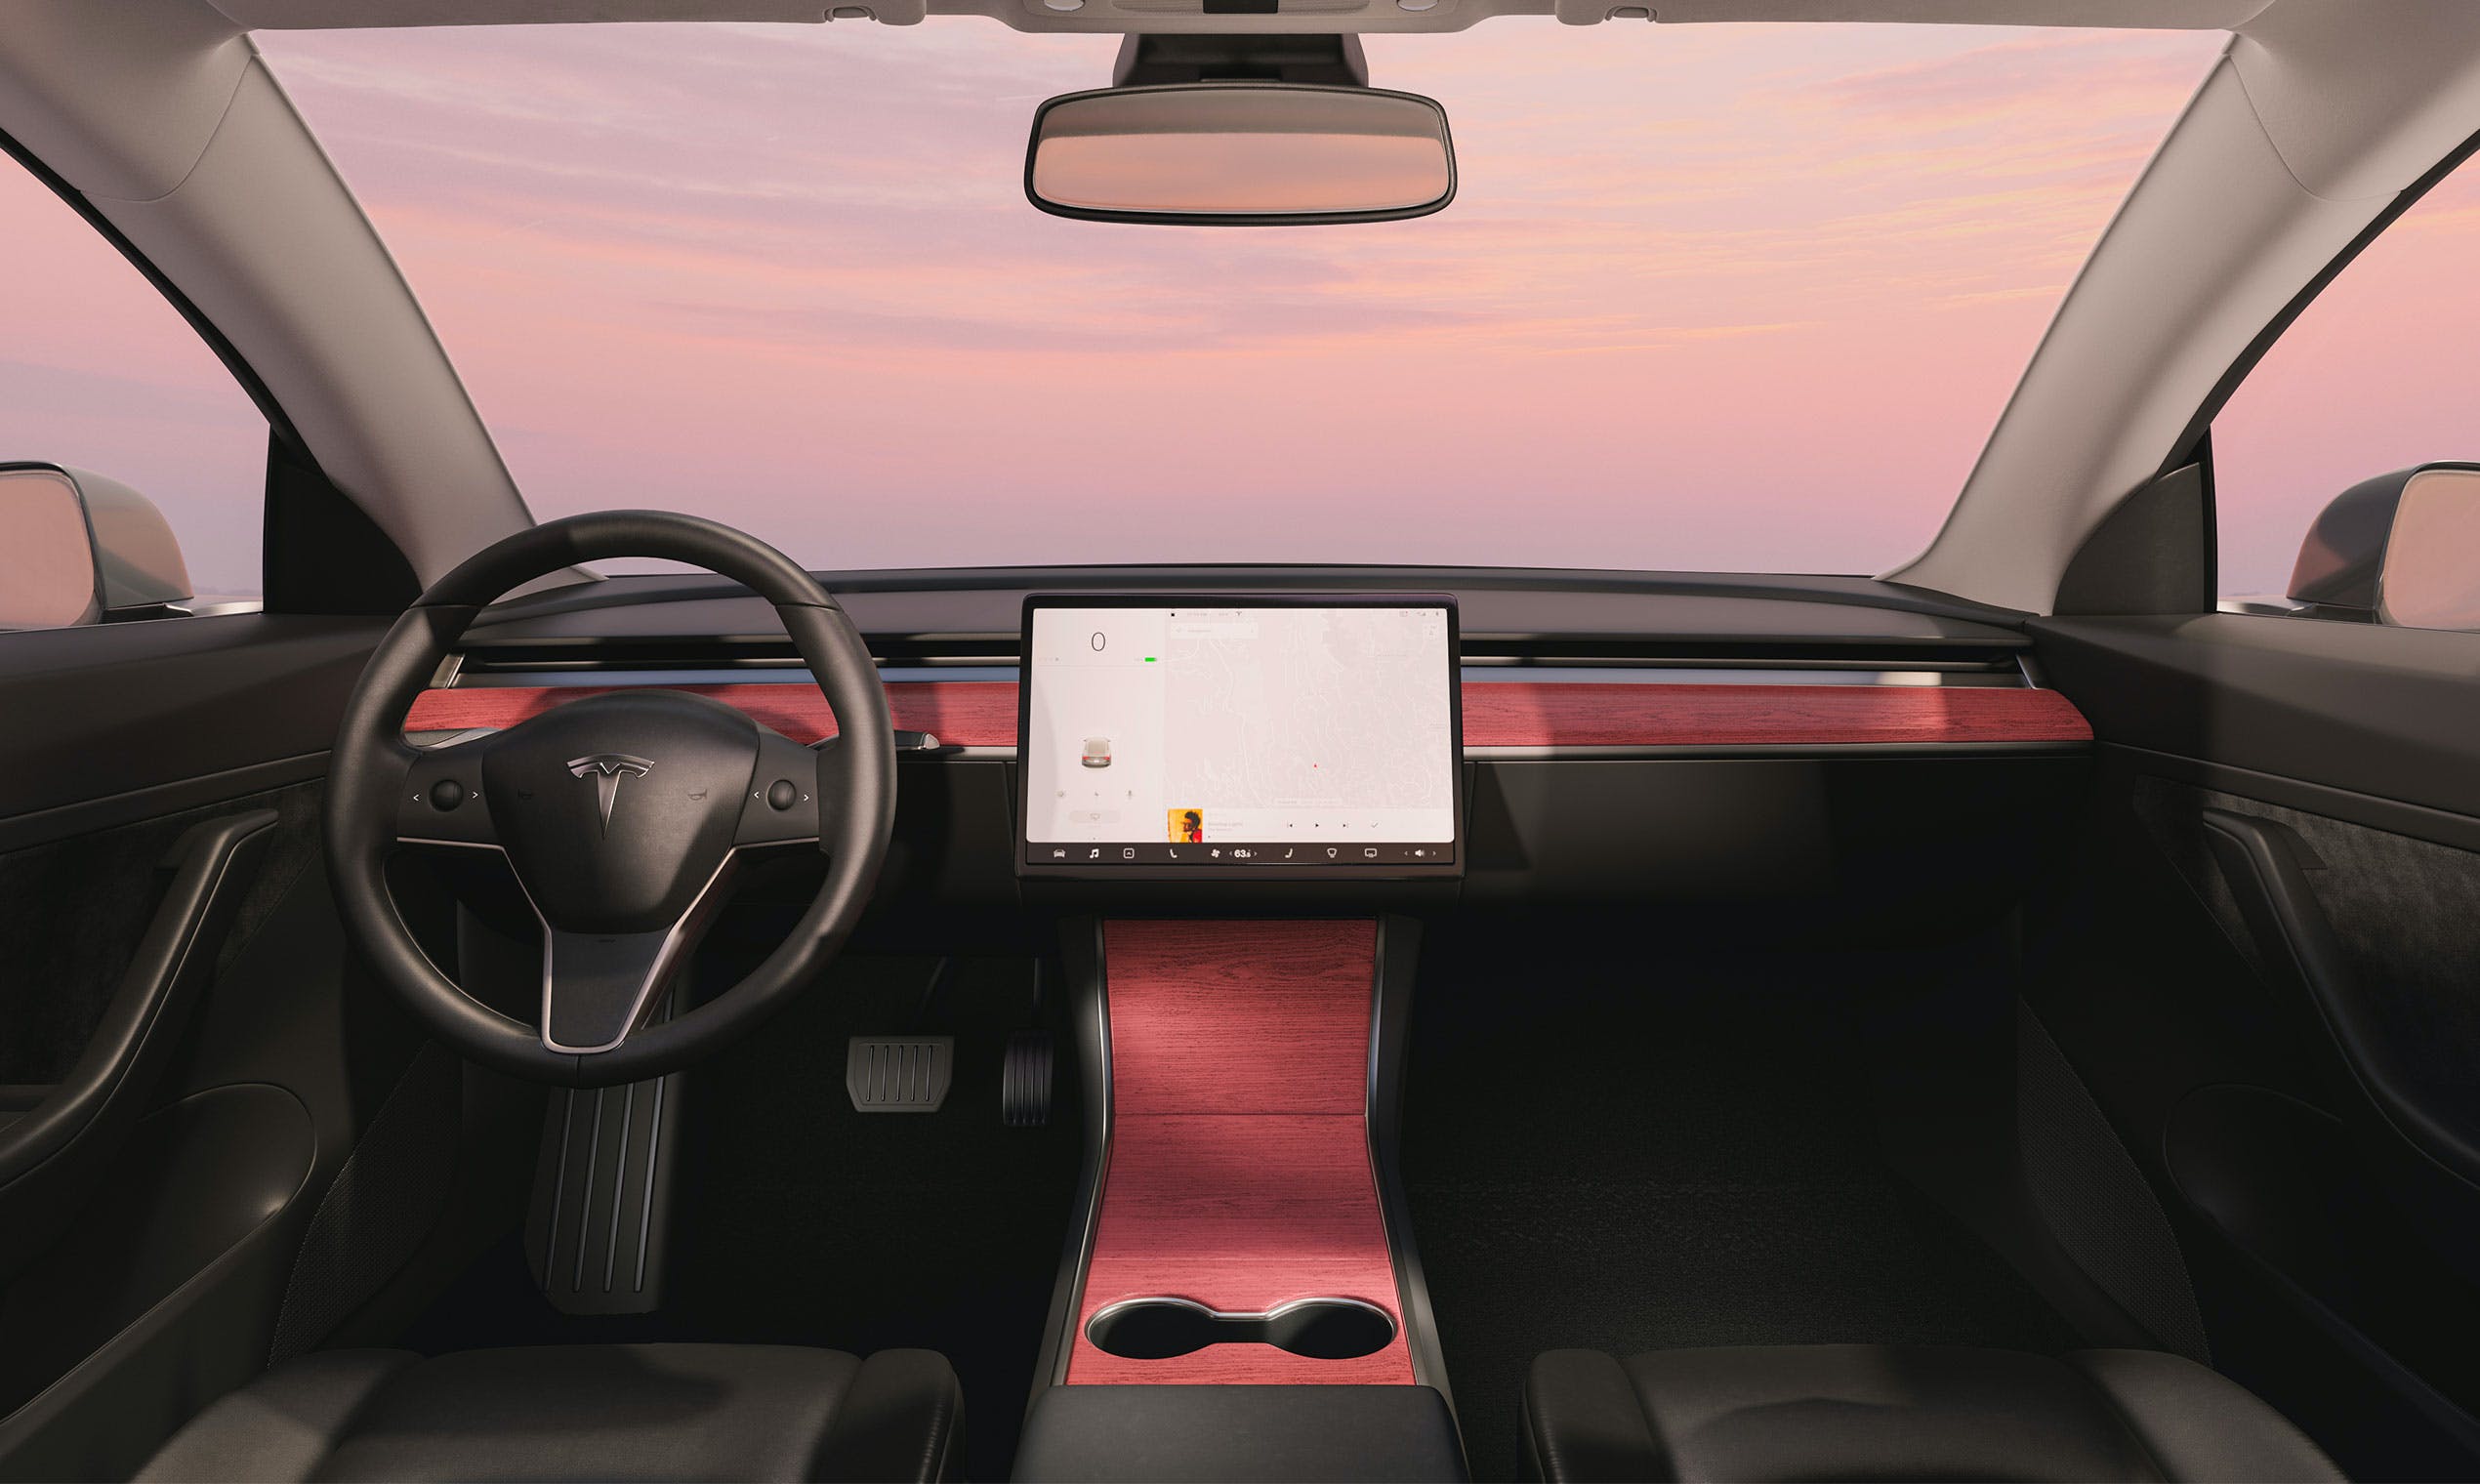 Keep your Tesla in top condition using Tesla model and accessories (tesla model y accessories)